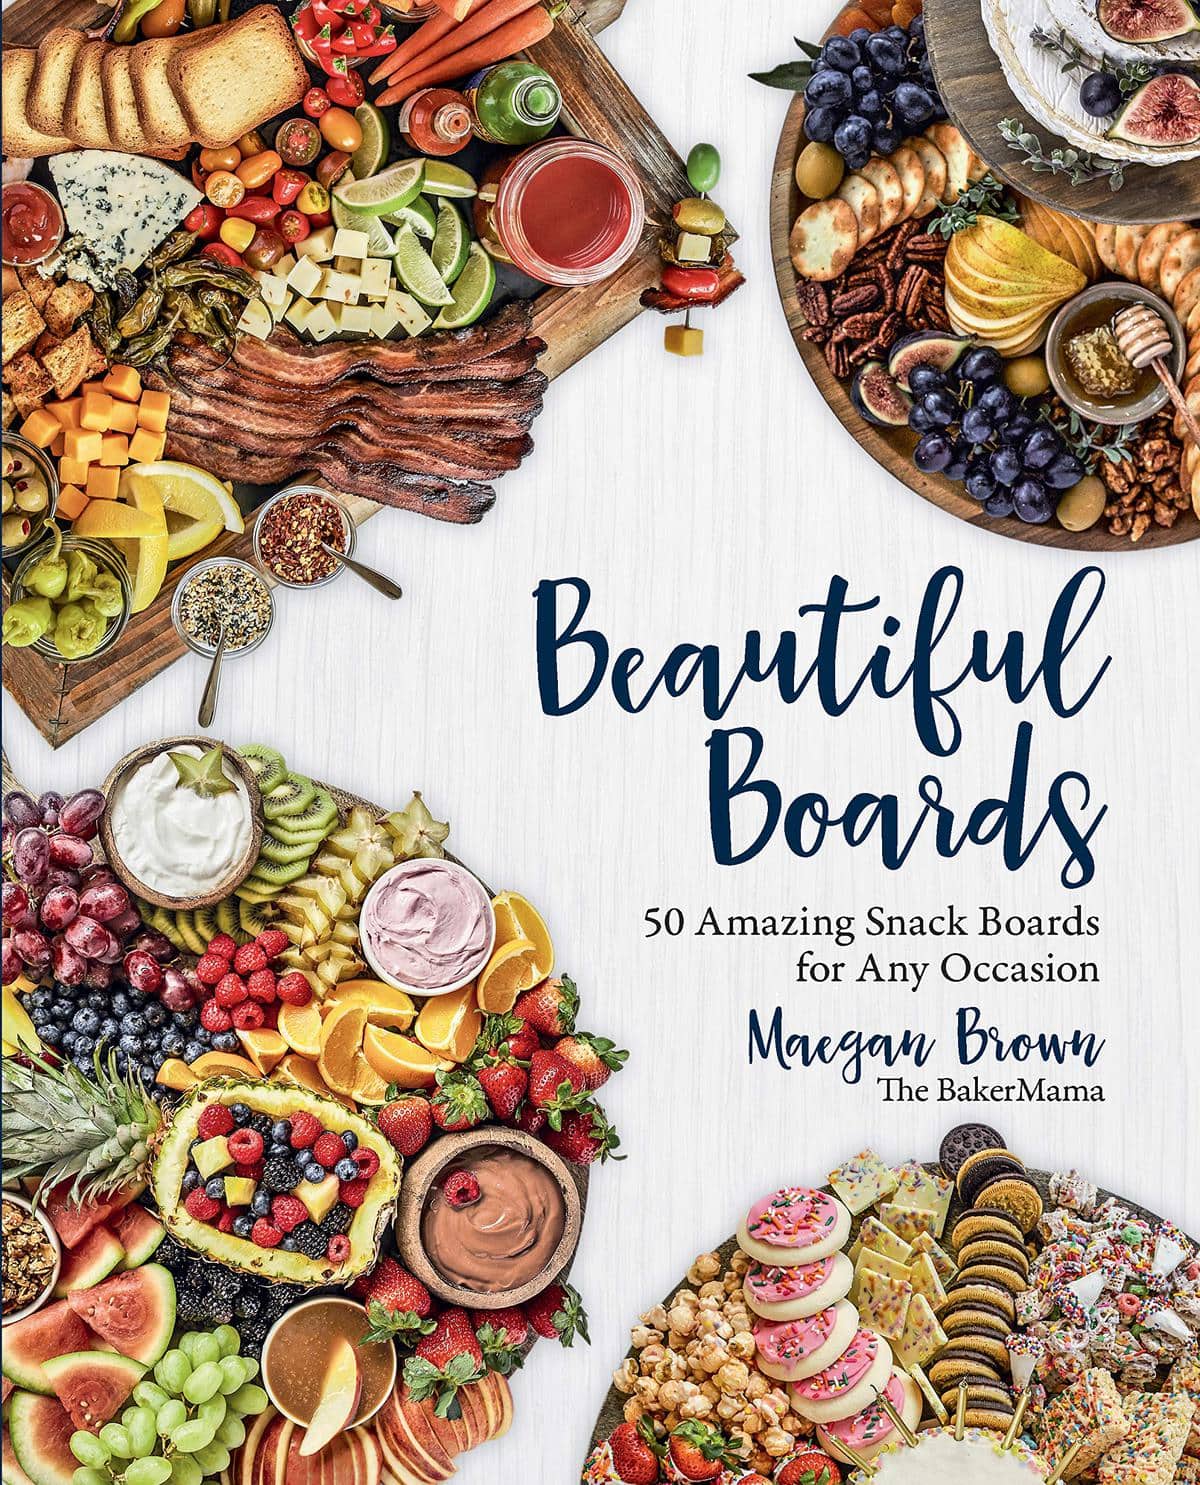 Book - \"Beautiful Boards, 50 Amazing Snack Boards for Any Occasion\"